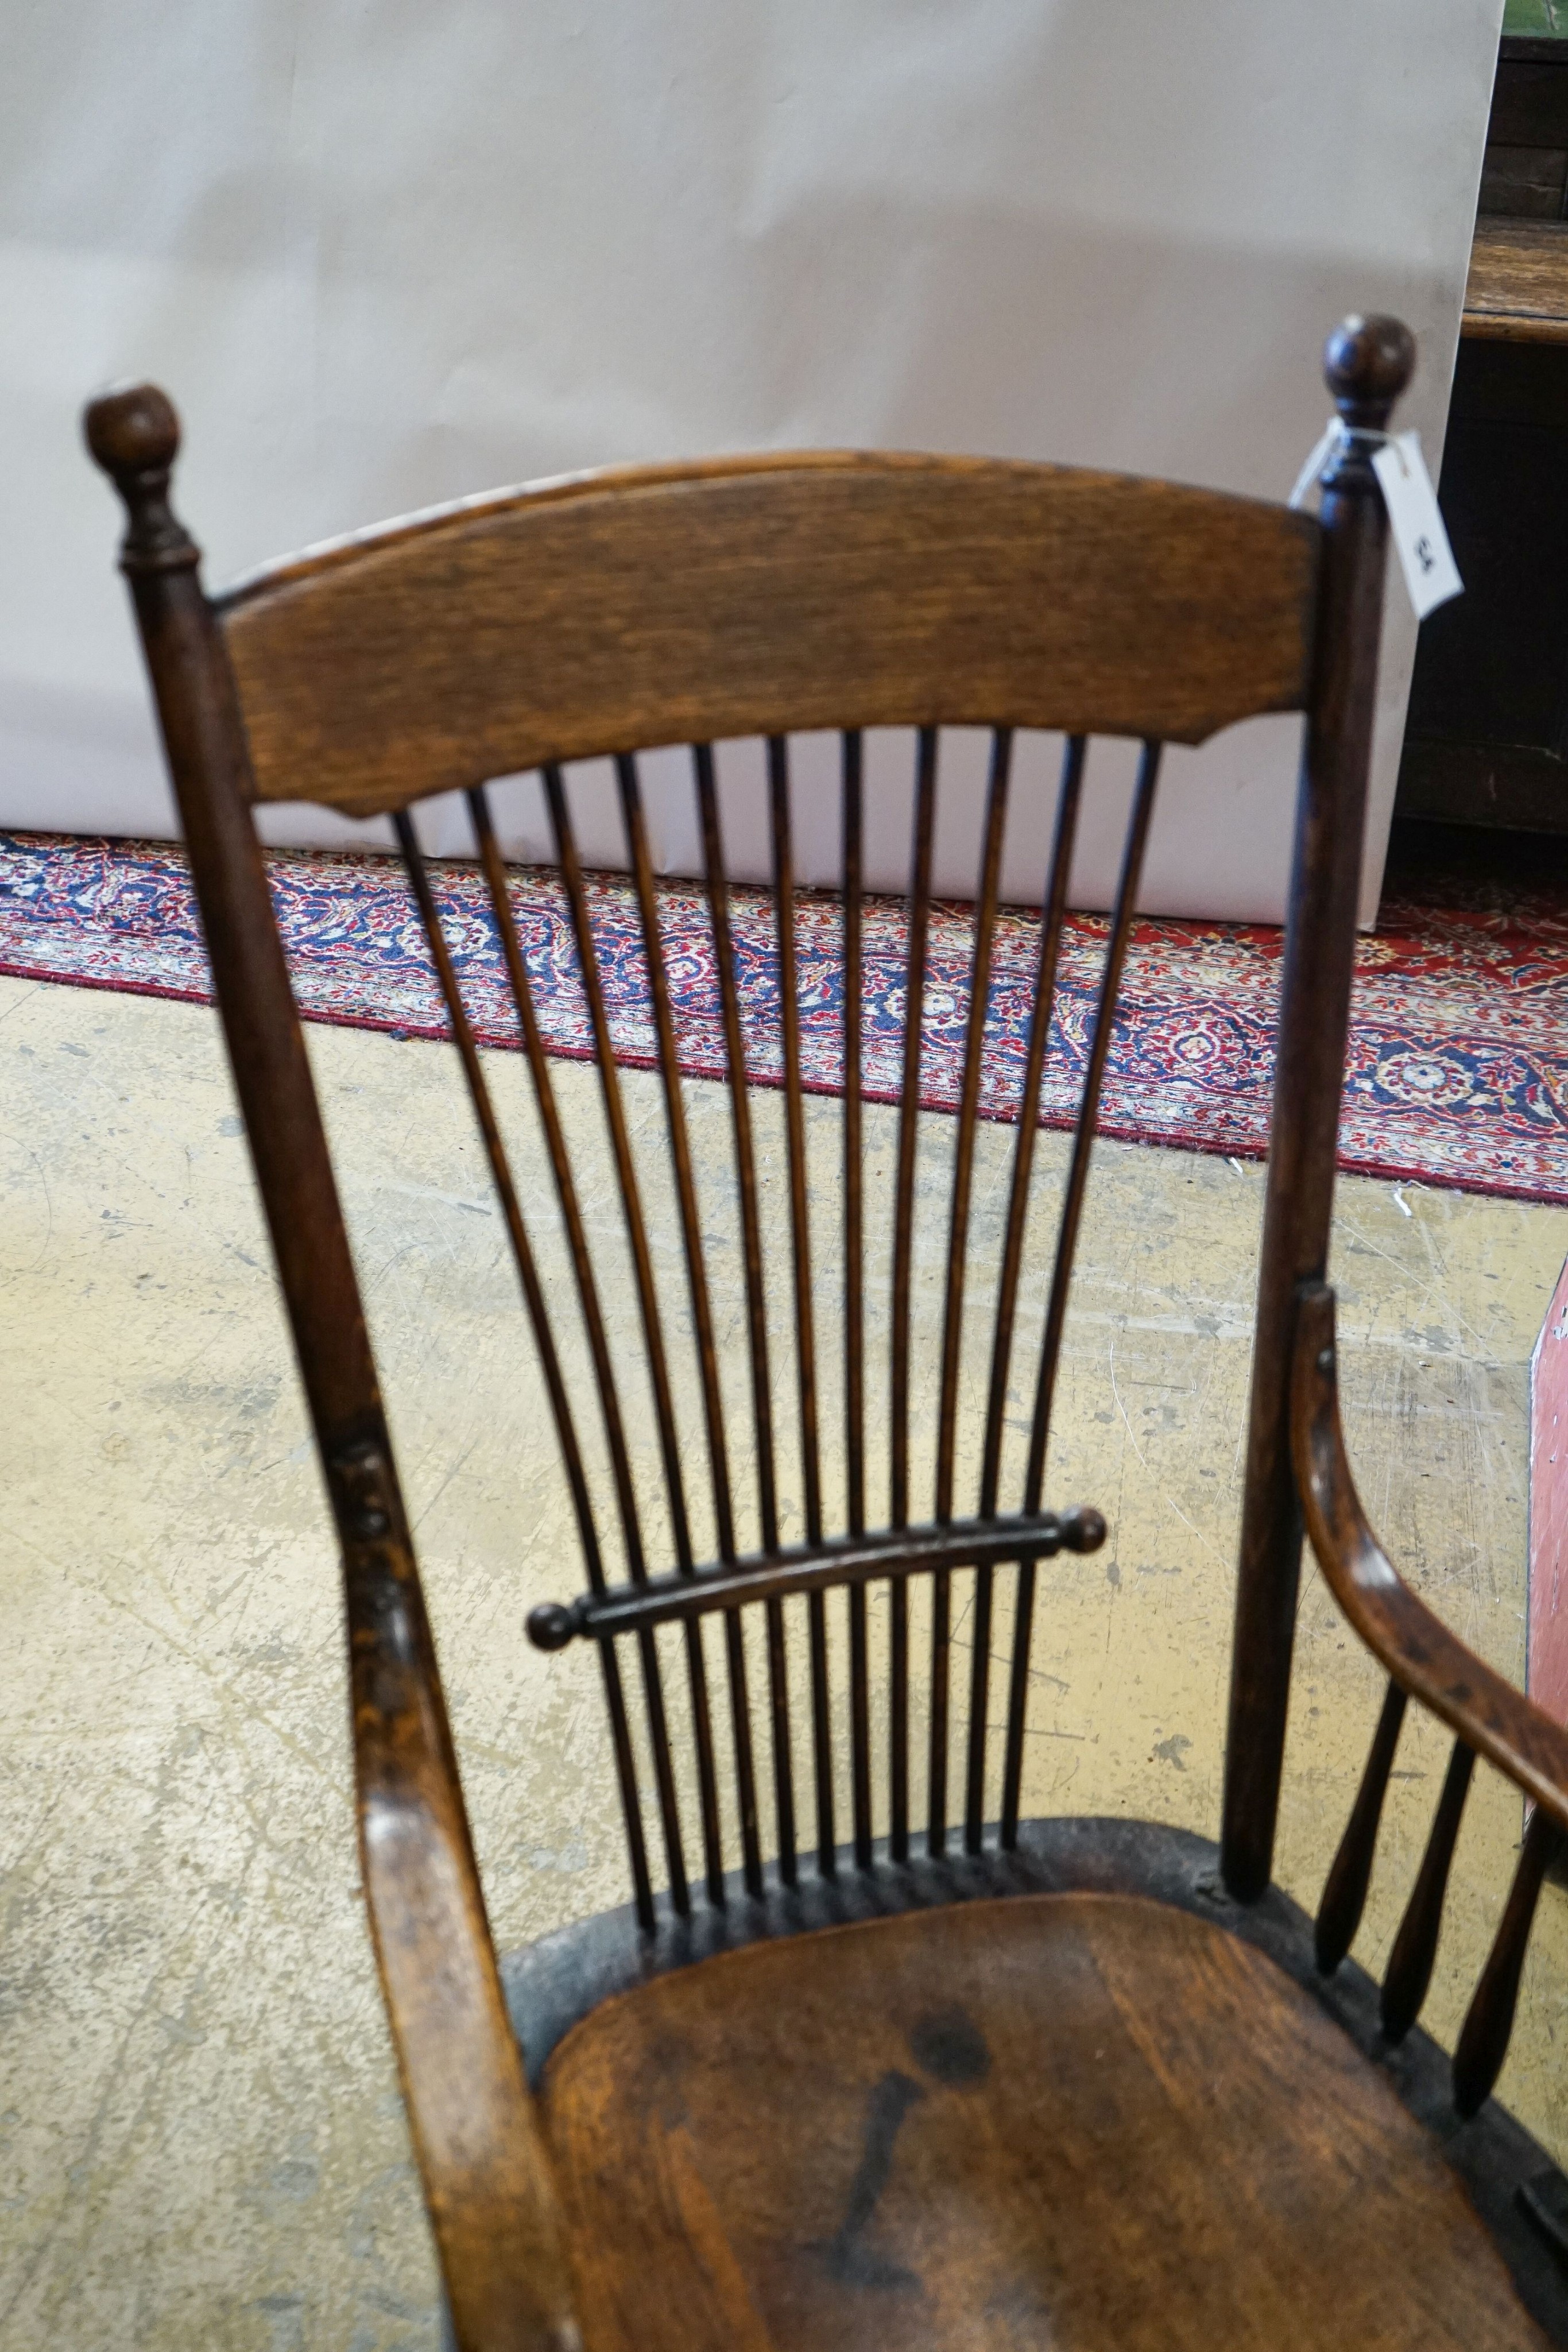 An early 20th century American ash and oak elbow chair, width 52cm, depth 42cm, height 100cm